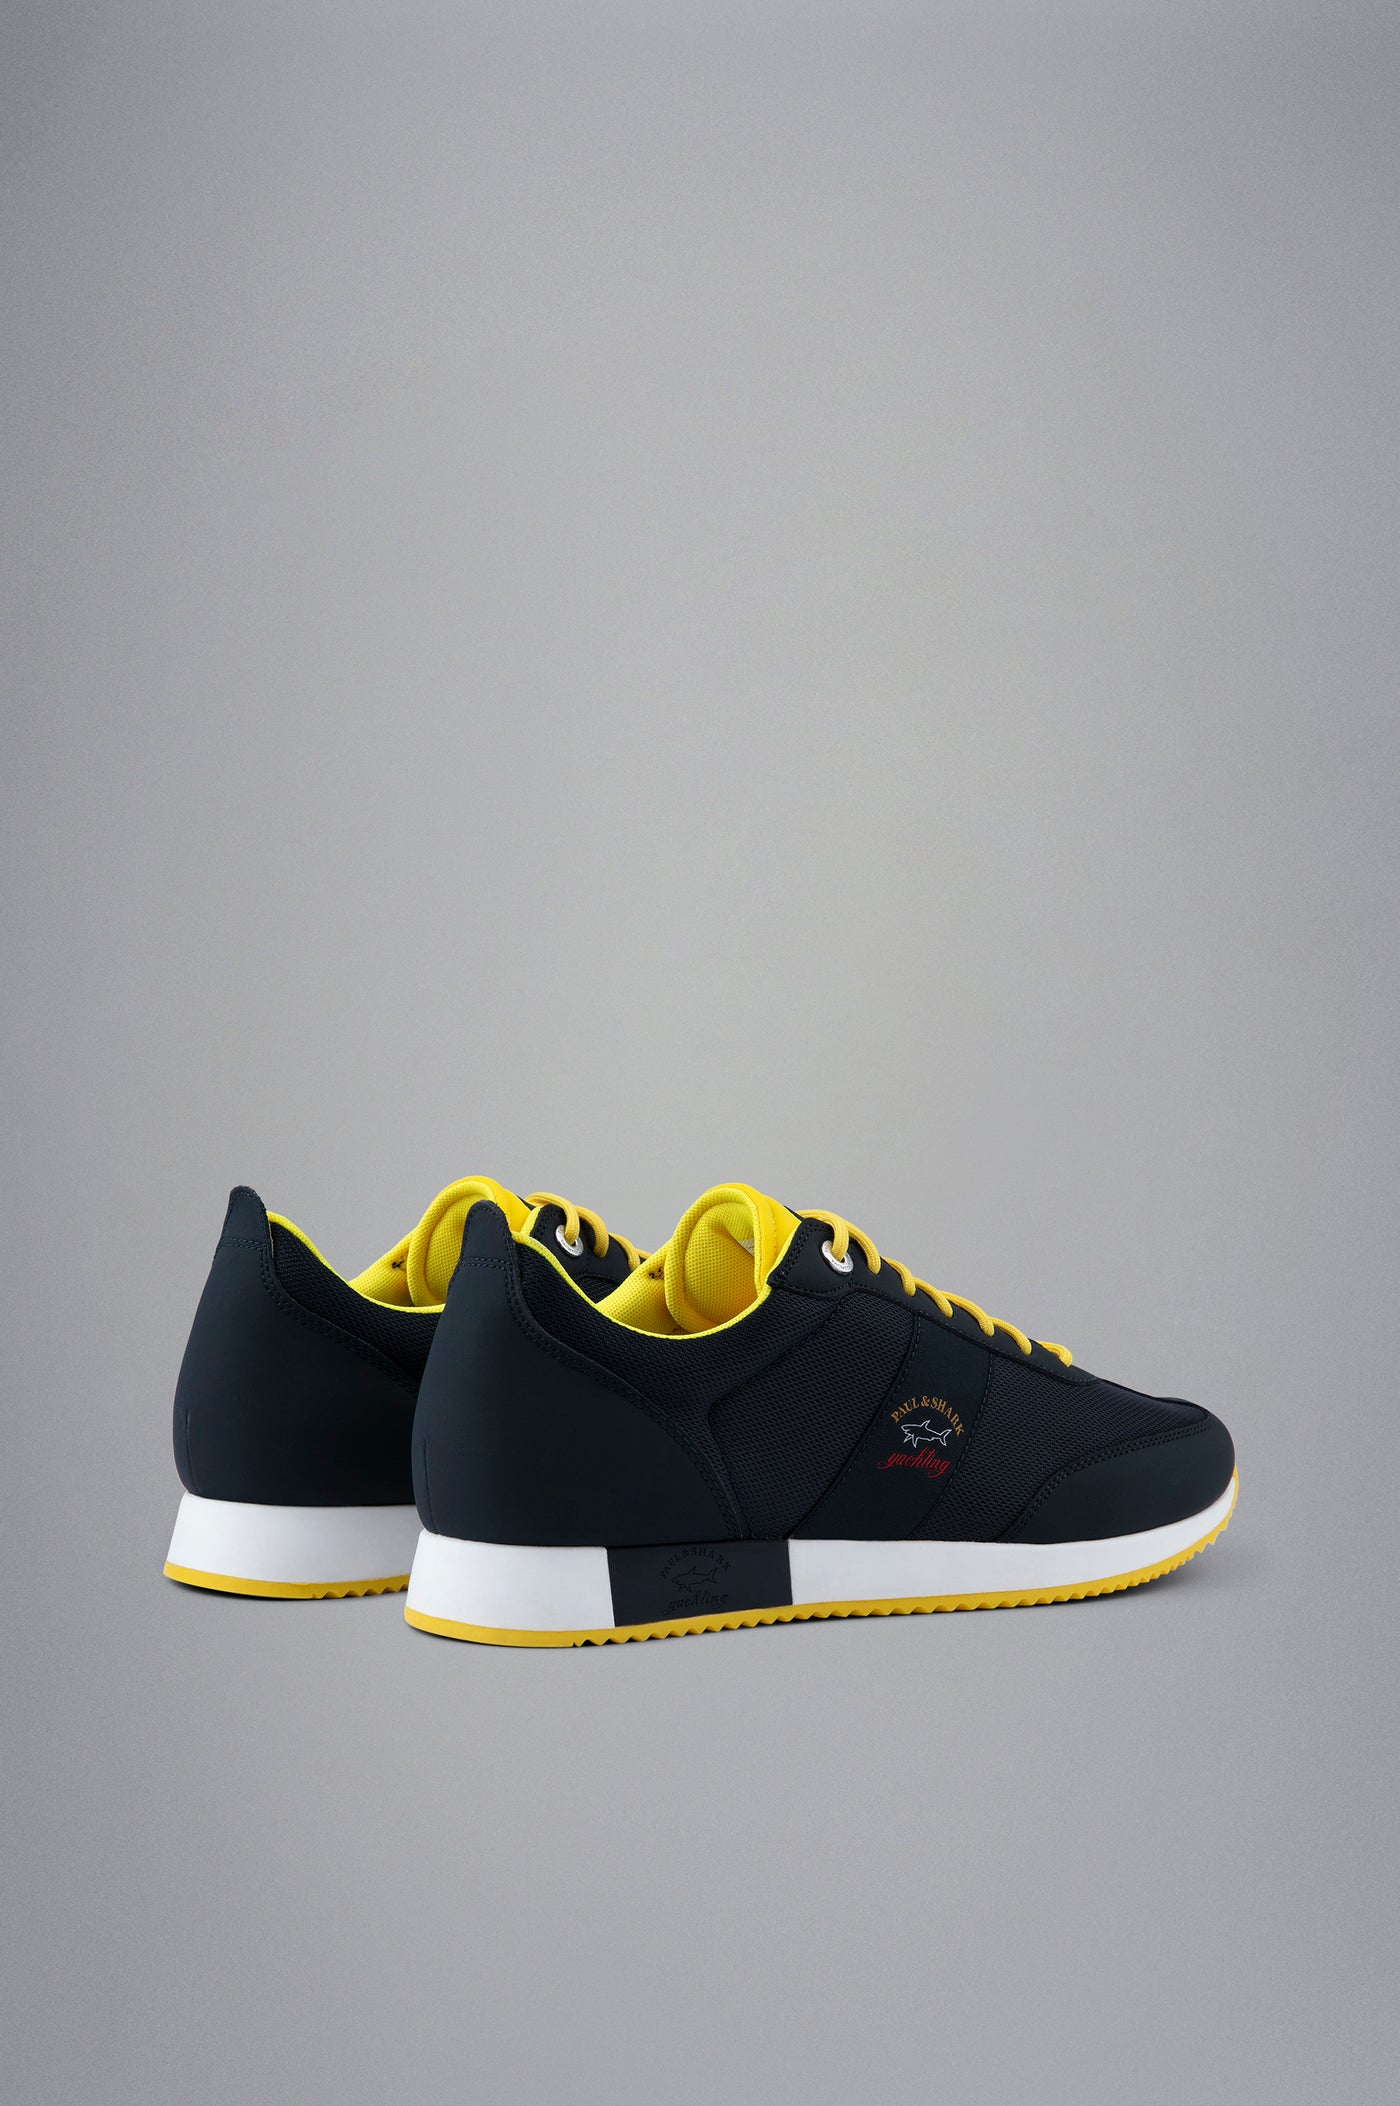 Paul & Shark Hybrid Trainers with Fabric Tech and Leather | Navy/Yellow